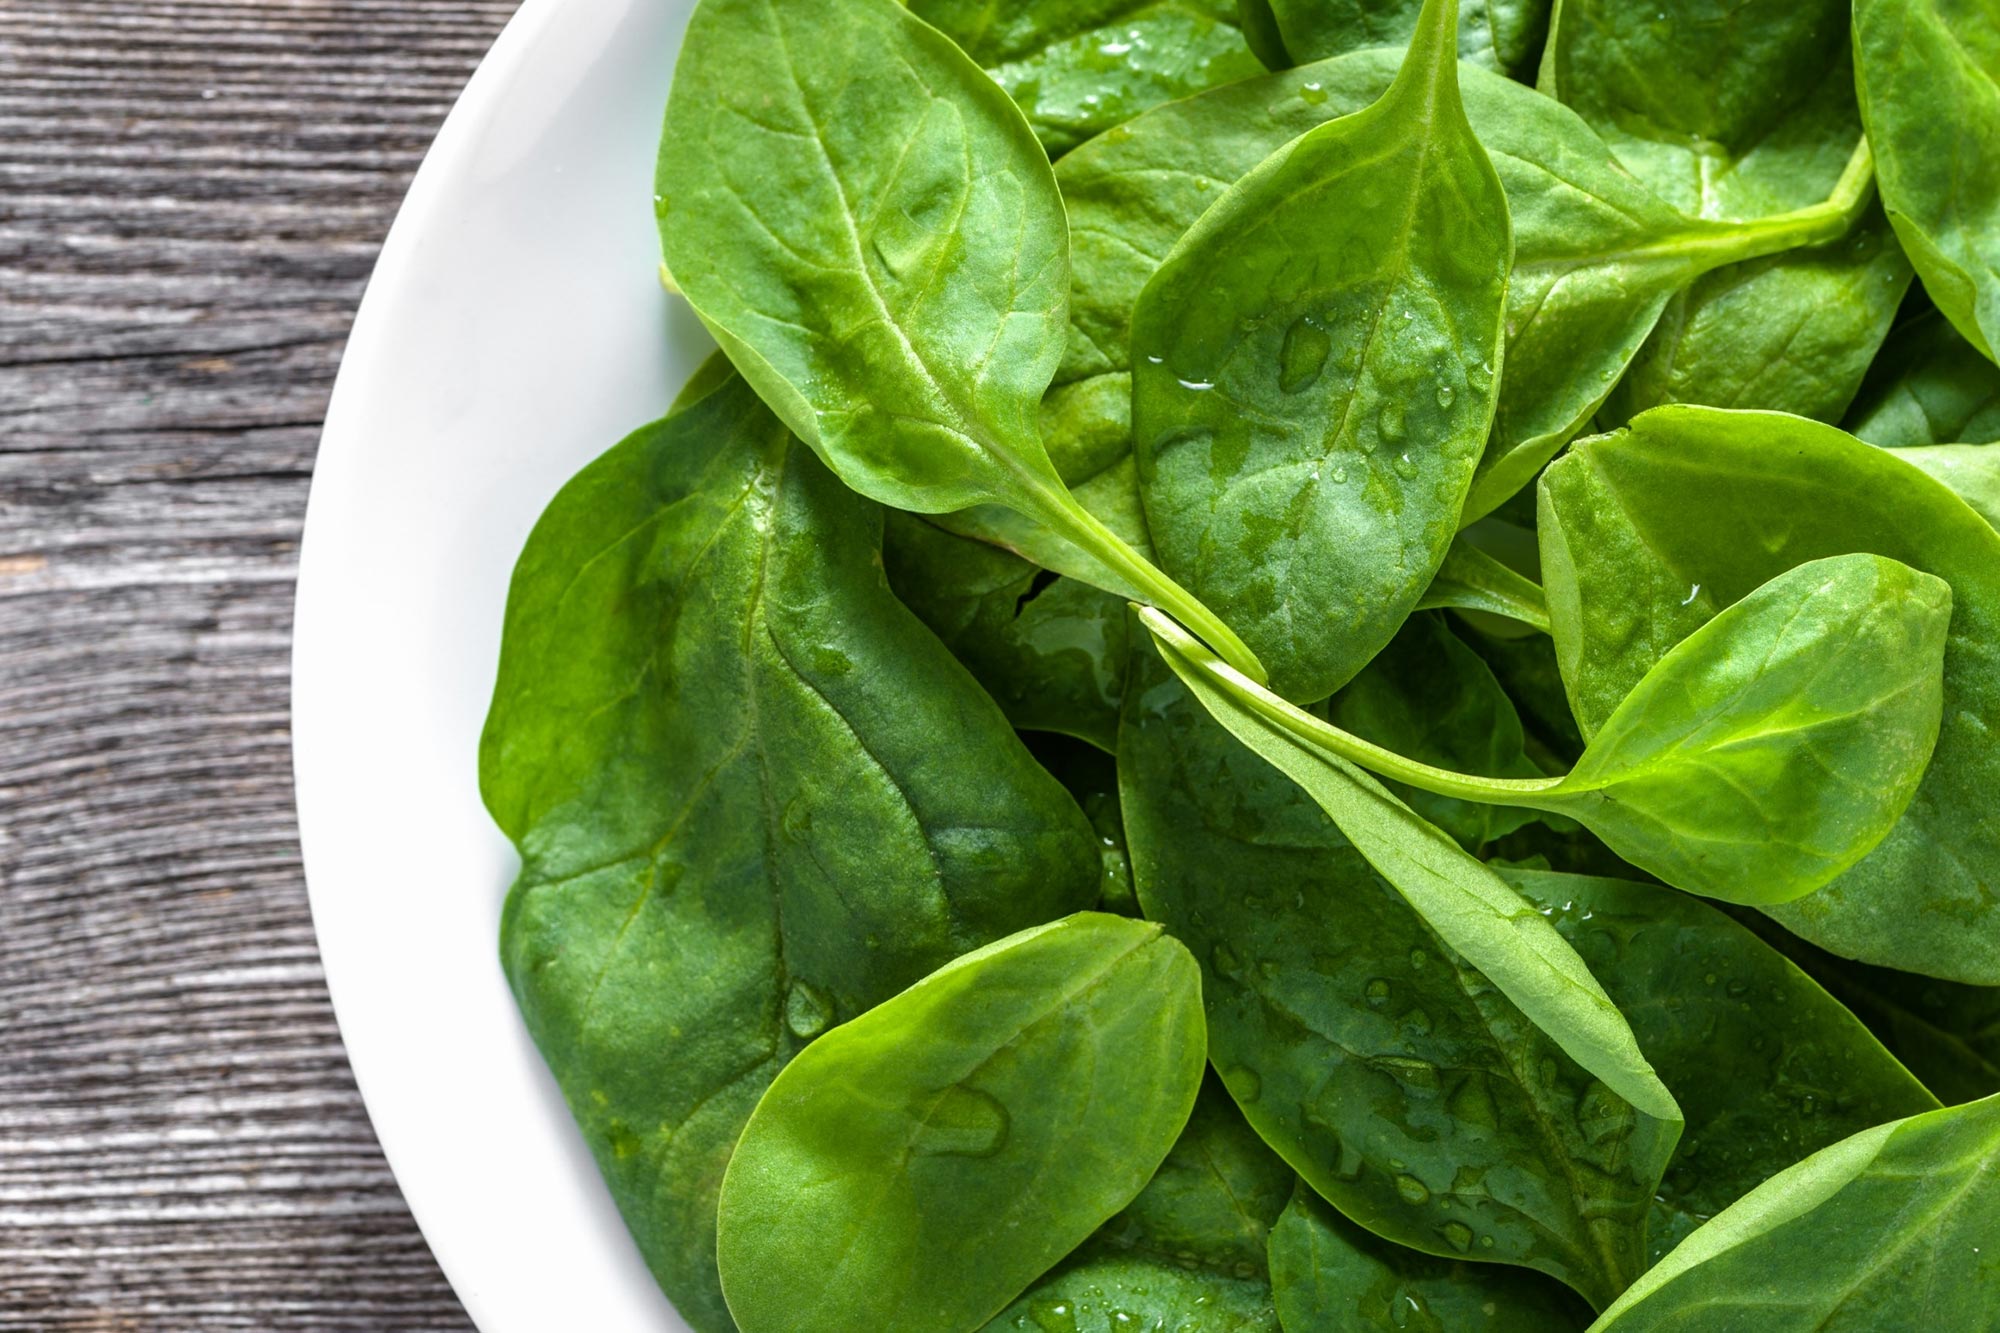 New research finds green leafy vegetables essential for muscle strength